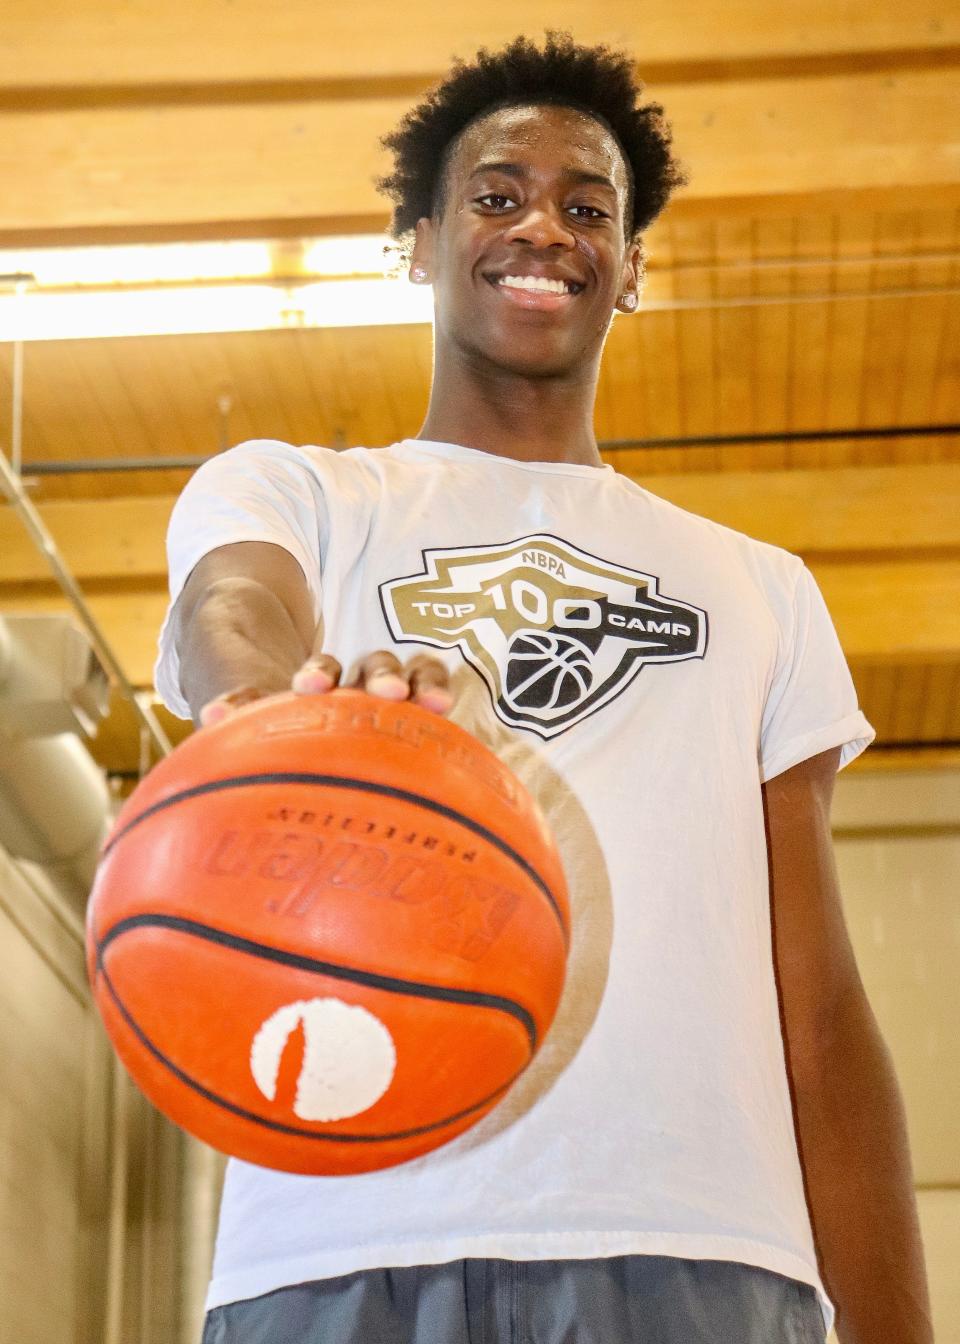 Brockton's AJ Dybantsa, 16, the top-rated freshman basketball player in the country according to ESPN Top 100, during a workout at Jubilee Christian Church in Stoughton on Monday, July 10, 2023.